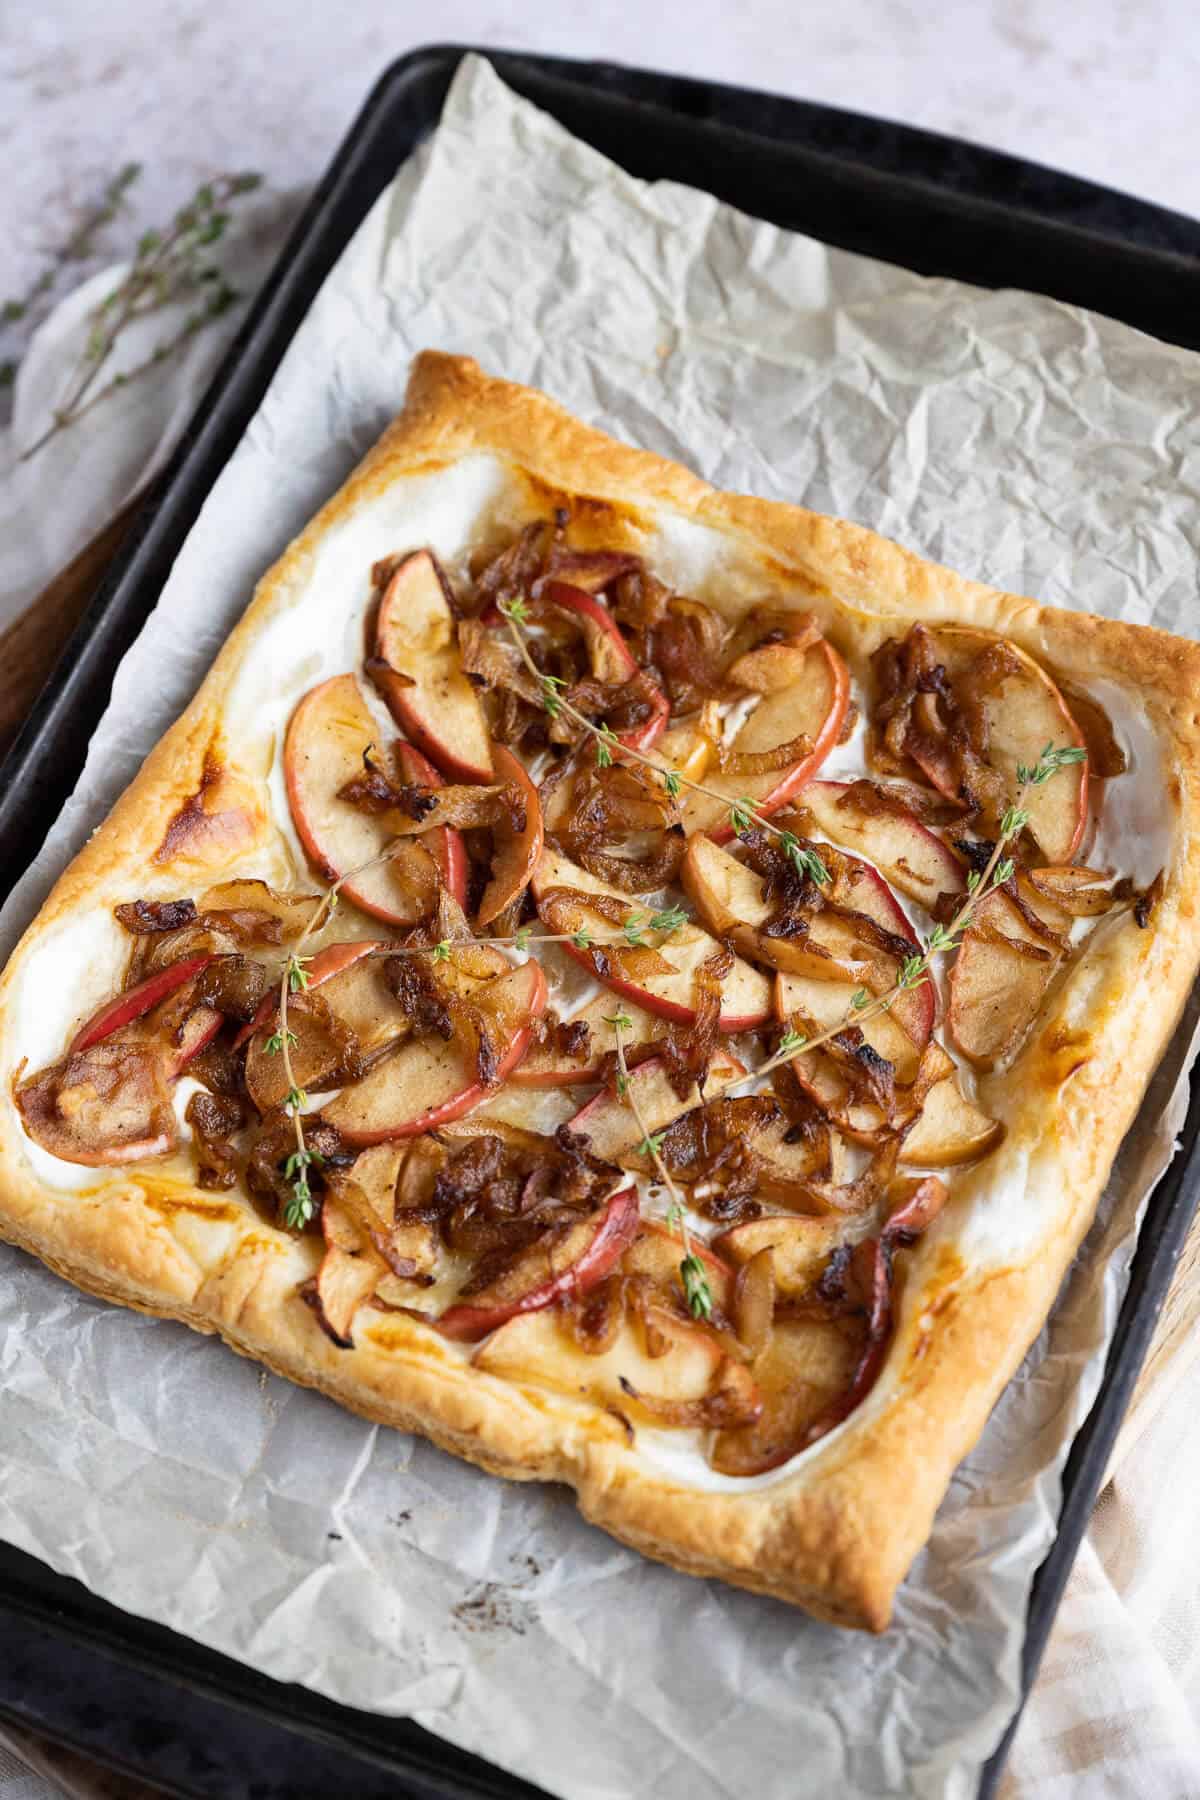 Just baked puff pastry with onions and apples, garnished with fresh thyme.